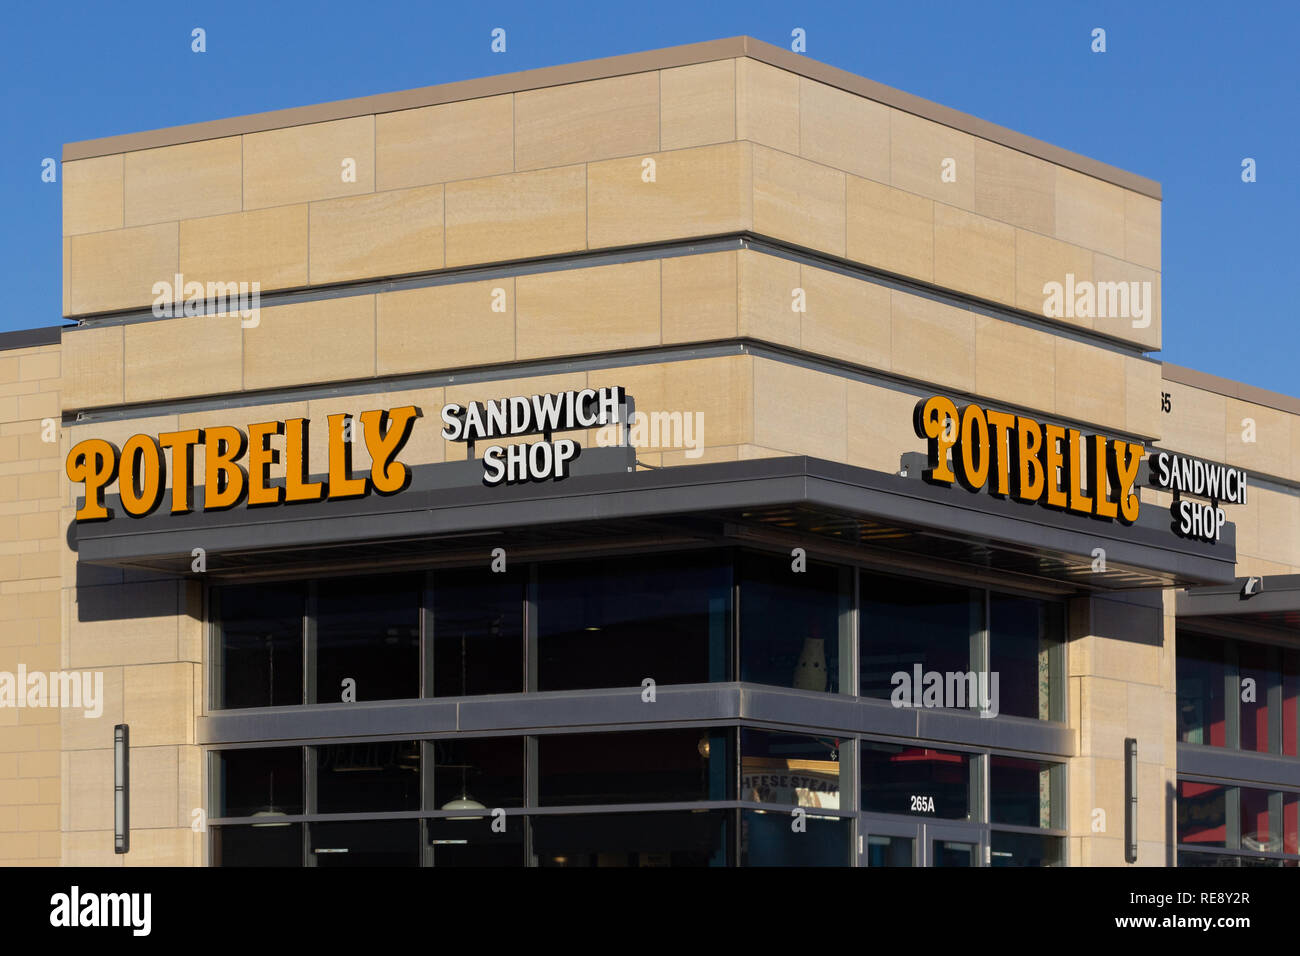 WOODBURY, MN/USA - JANUARY 19, 2019: Potbelly Sandwich Shop exterior sign and logo. Potbelly Corporation is a publicly traded restaurant chain that se Stock Photo